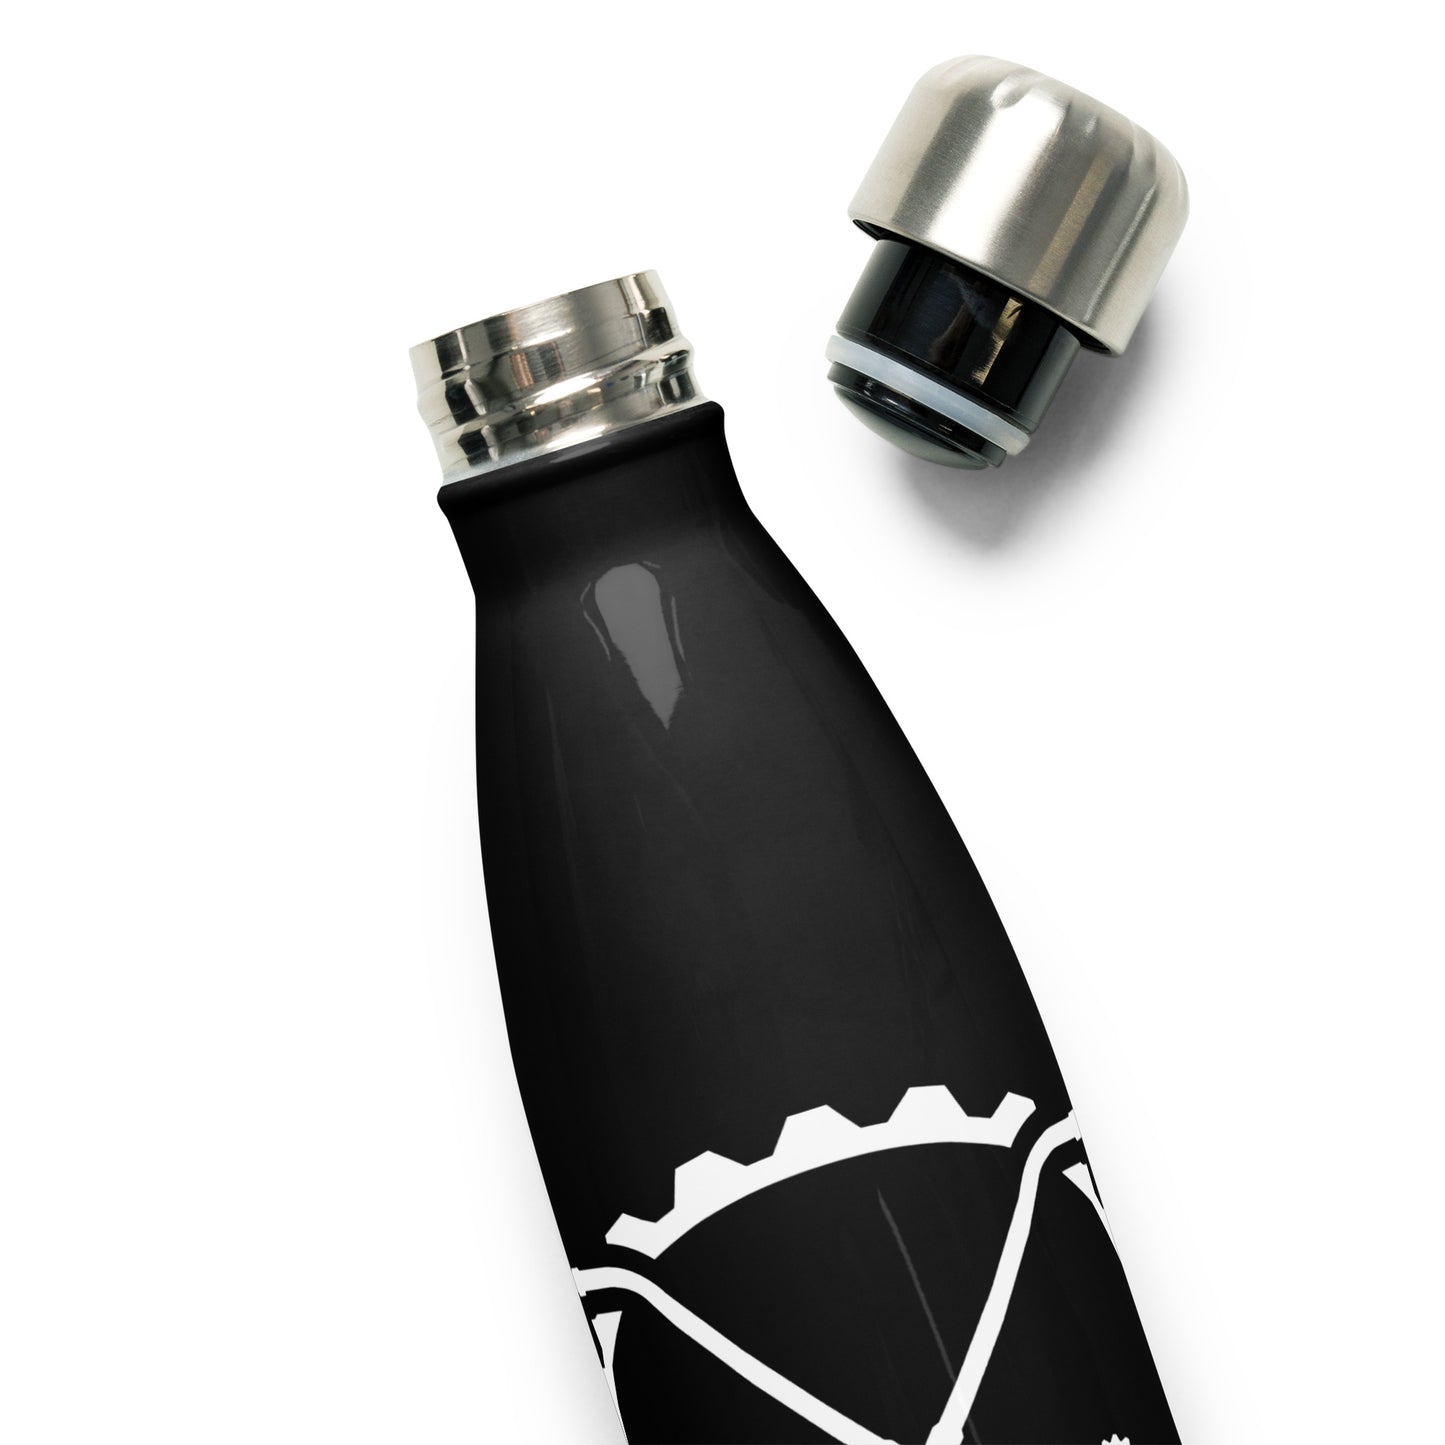 Torched Stainless Steel Water Bottle